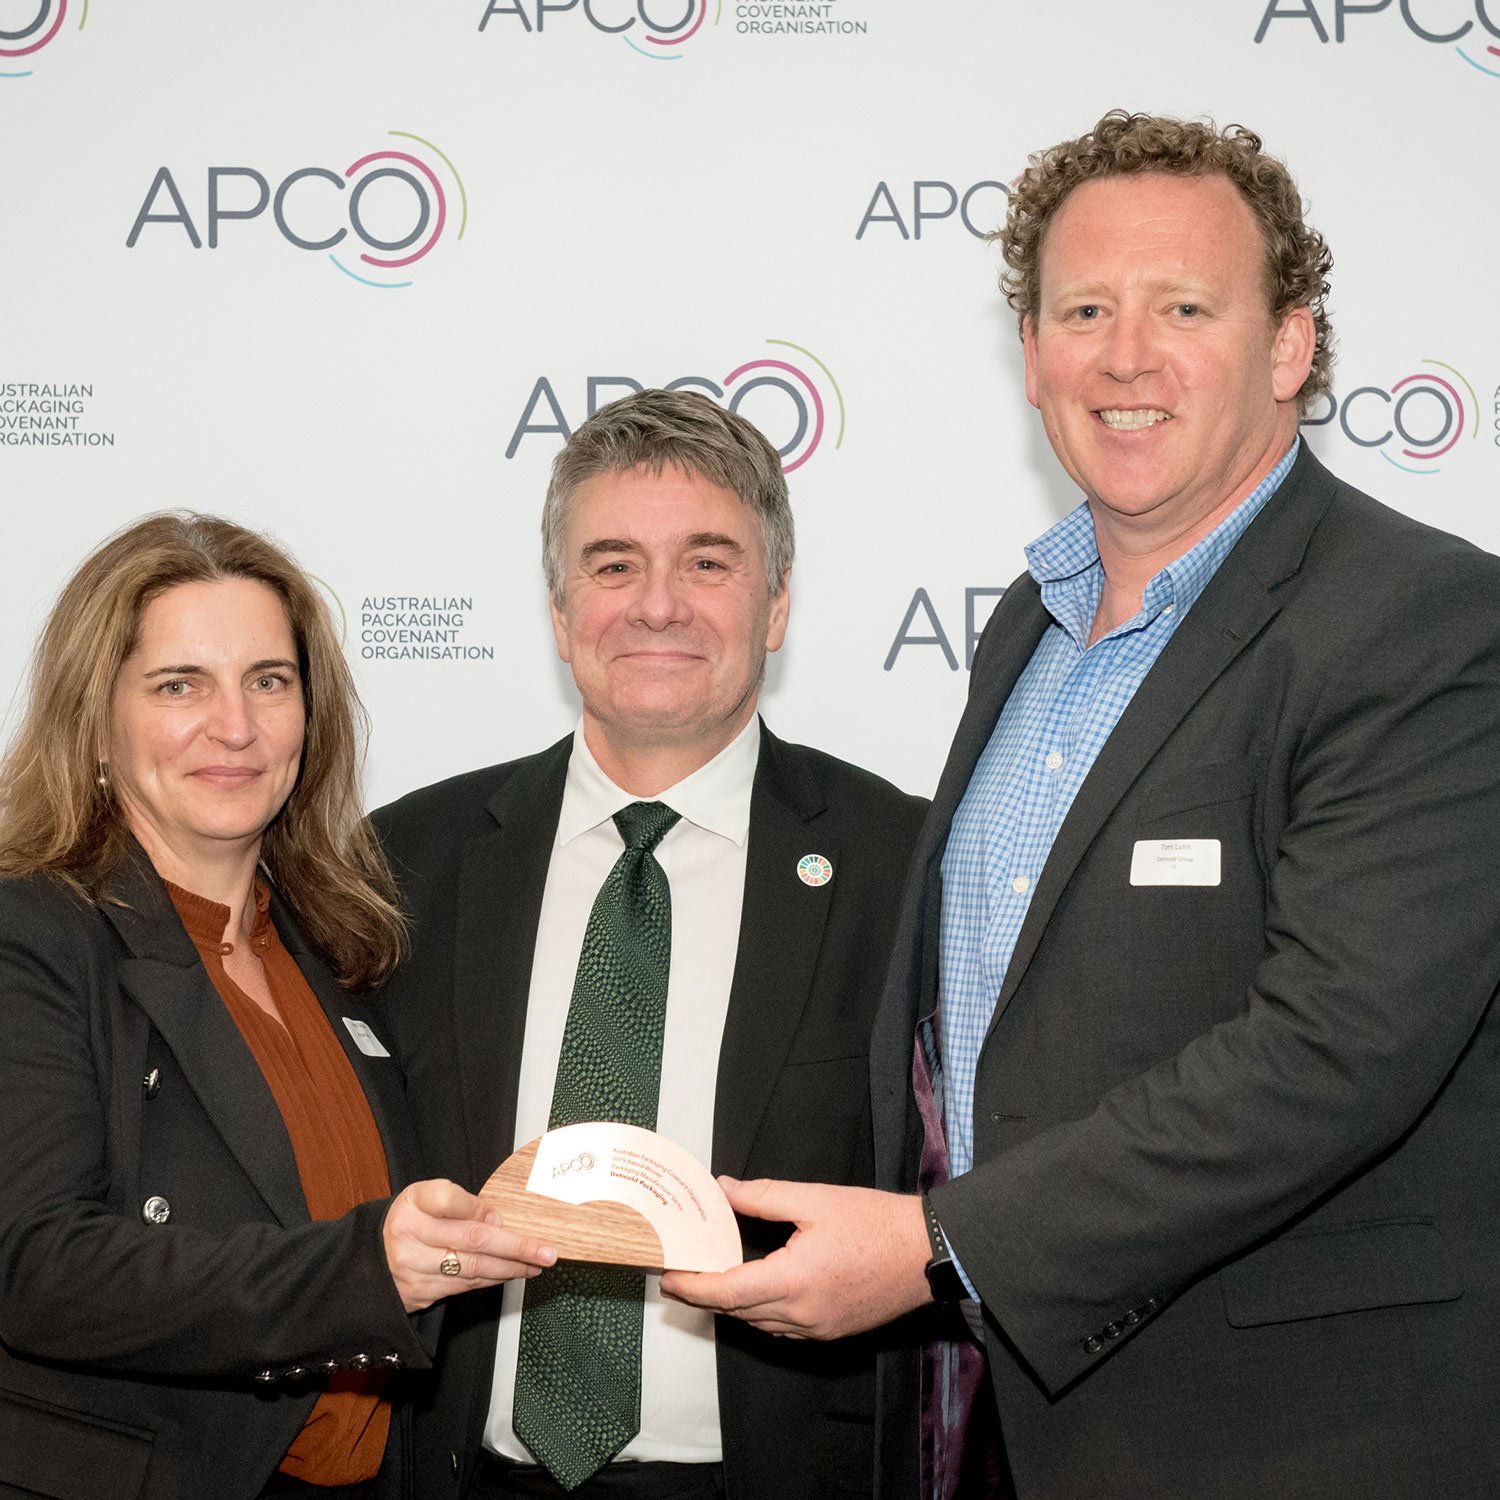 Detmold Group's Anna Falkiner, APCO Director Andrew Petersen, and Detmold Group's Tom Lunn at the APCO Awards 2019